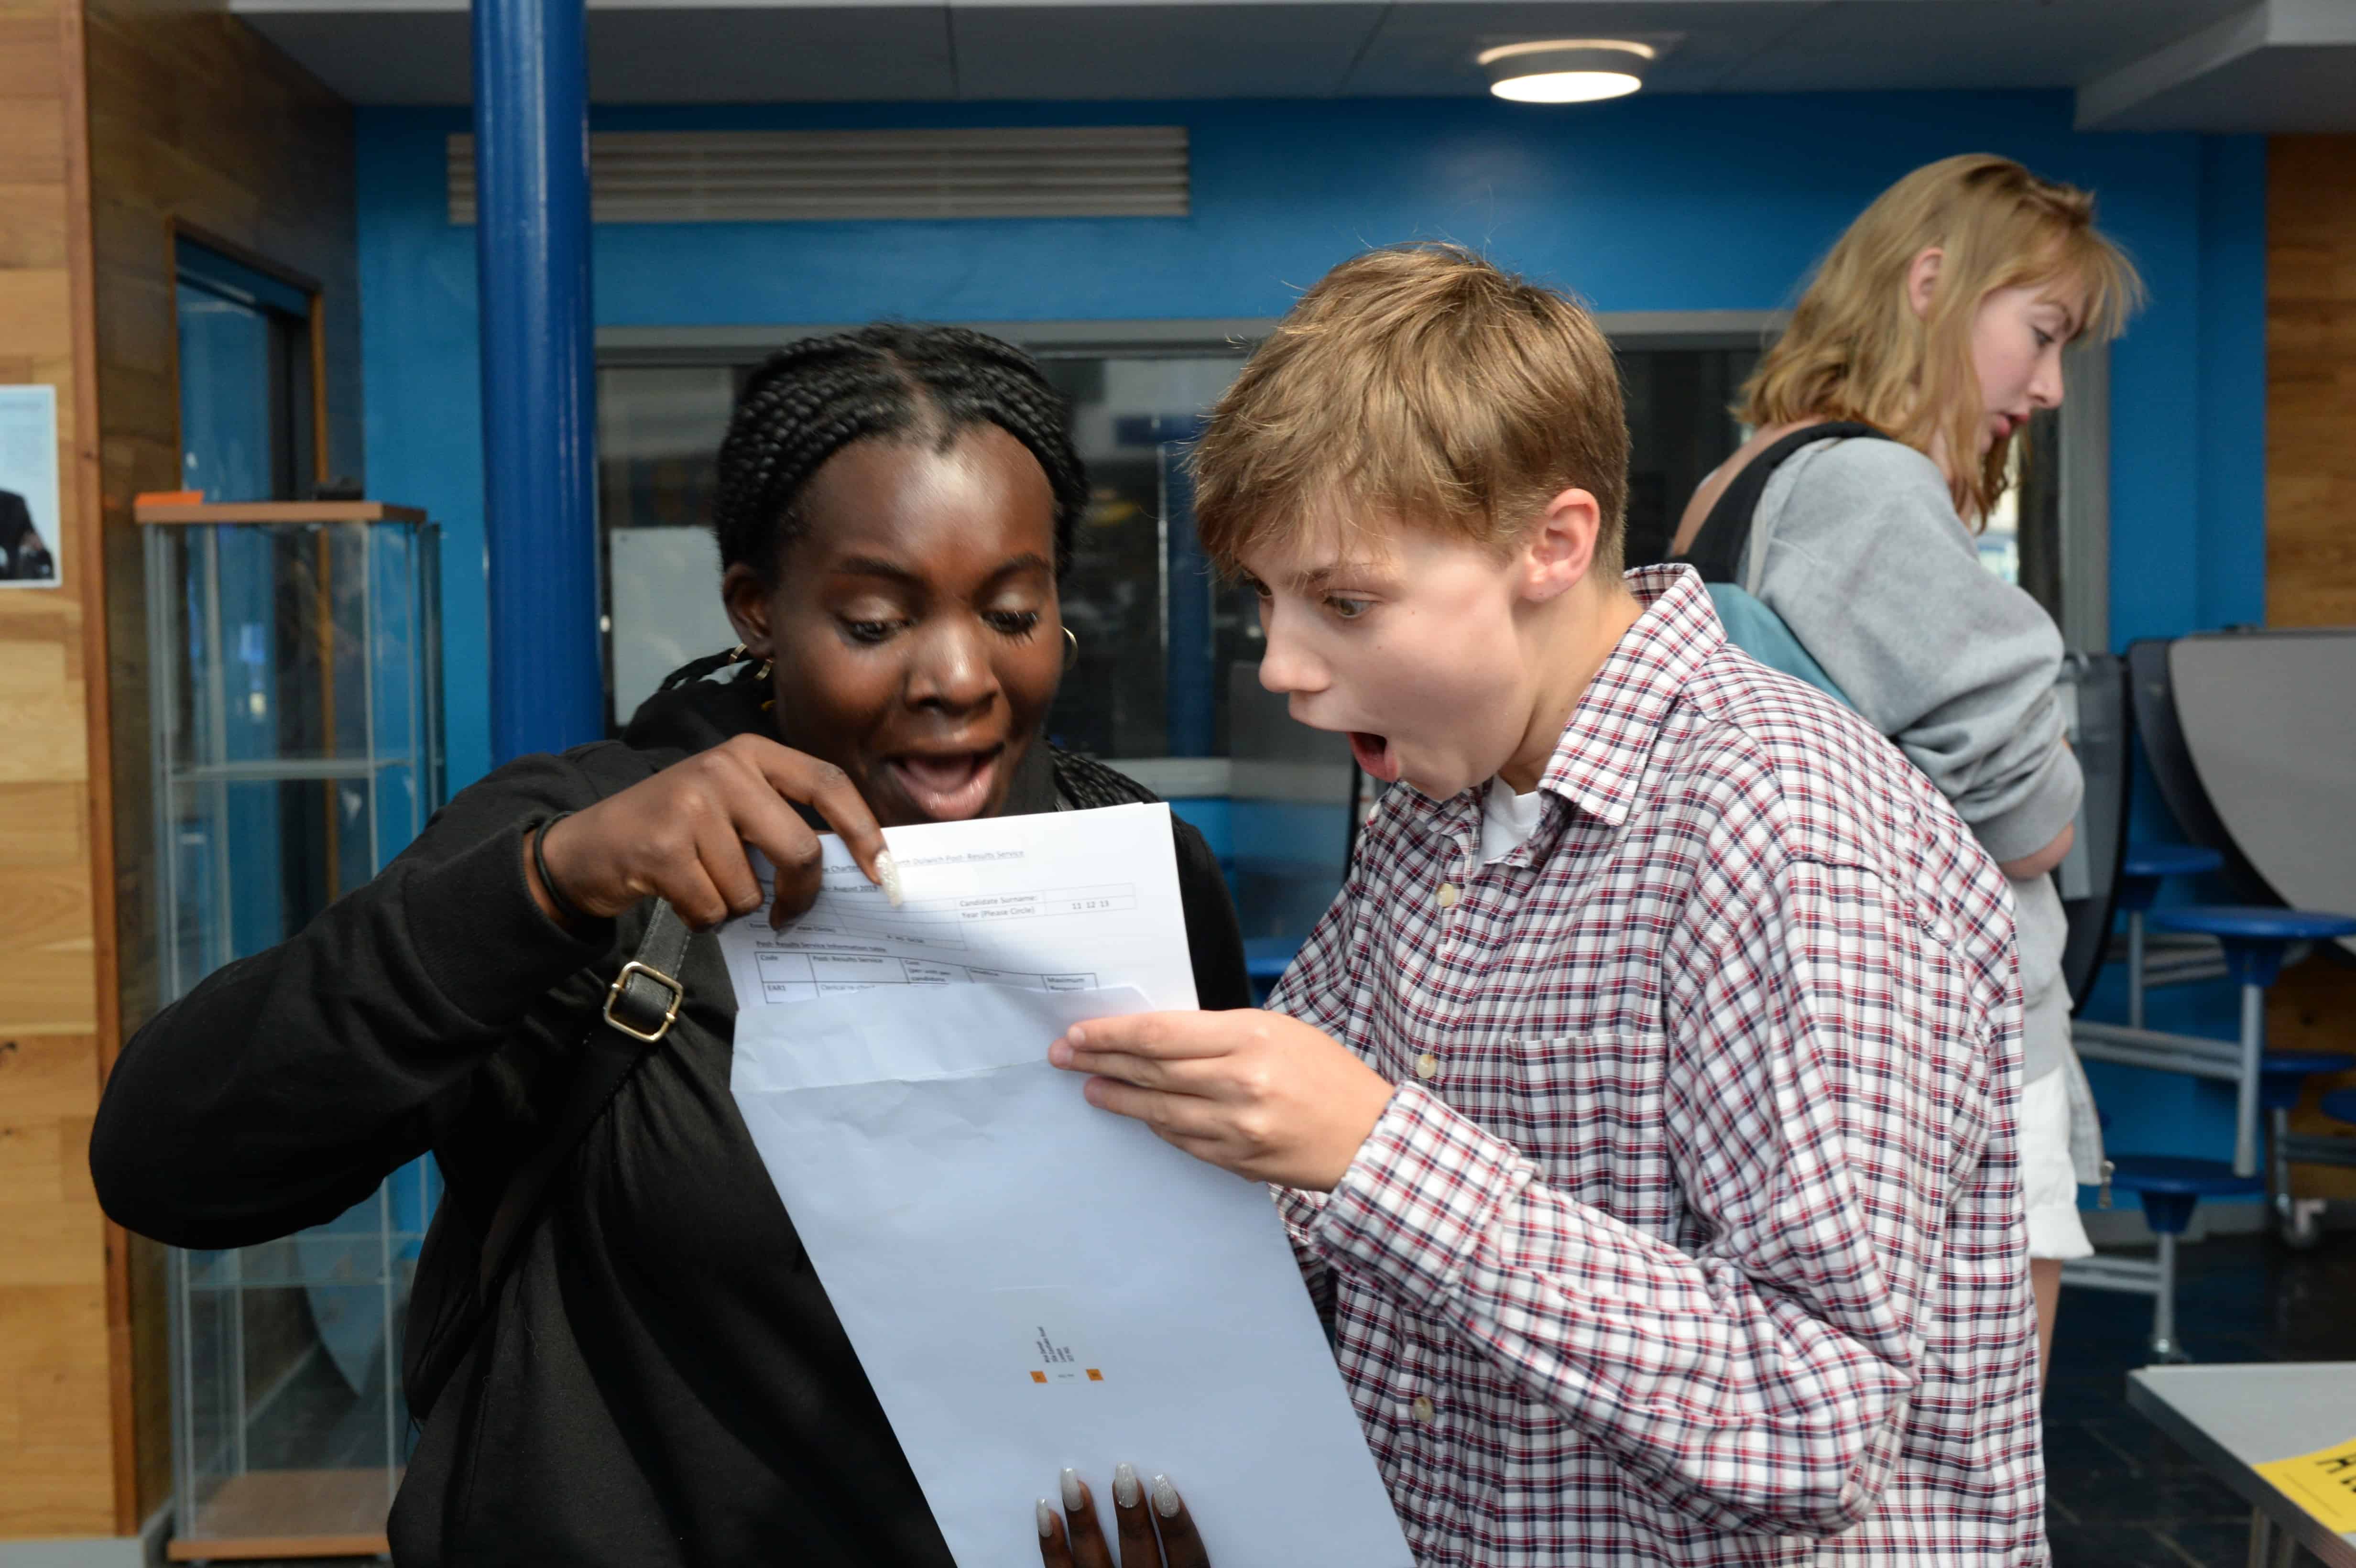 The Charter School North Dulwich, GCSE results day 22 Aug 19.
Photo: Tom Parkes